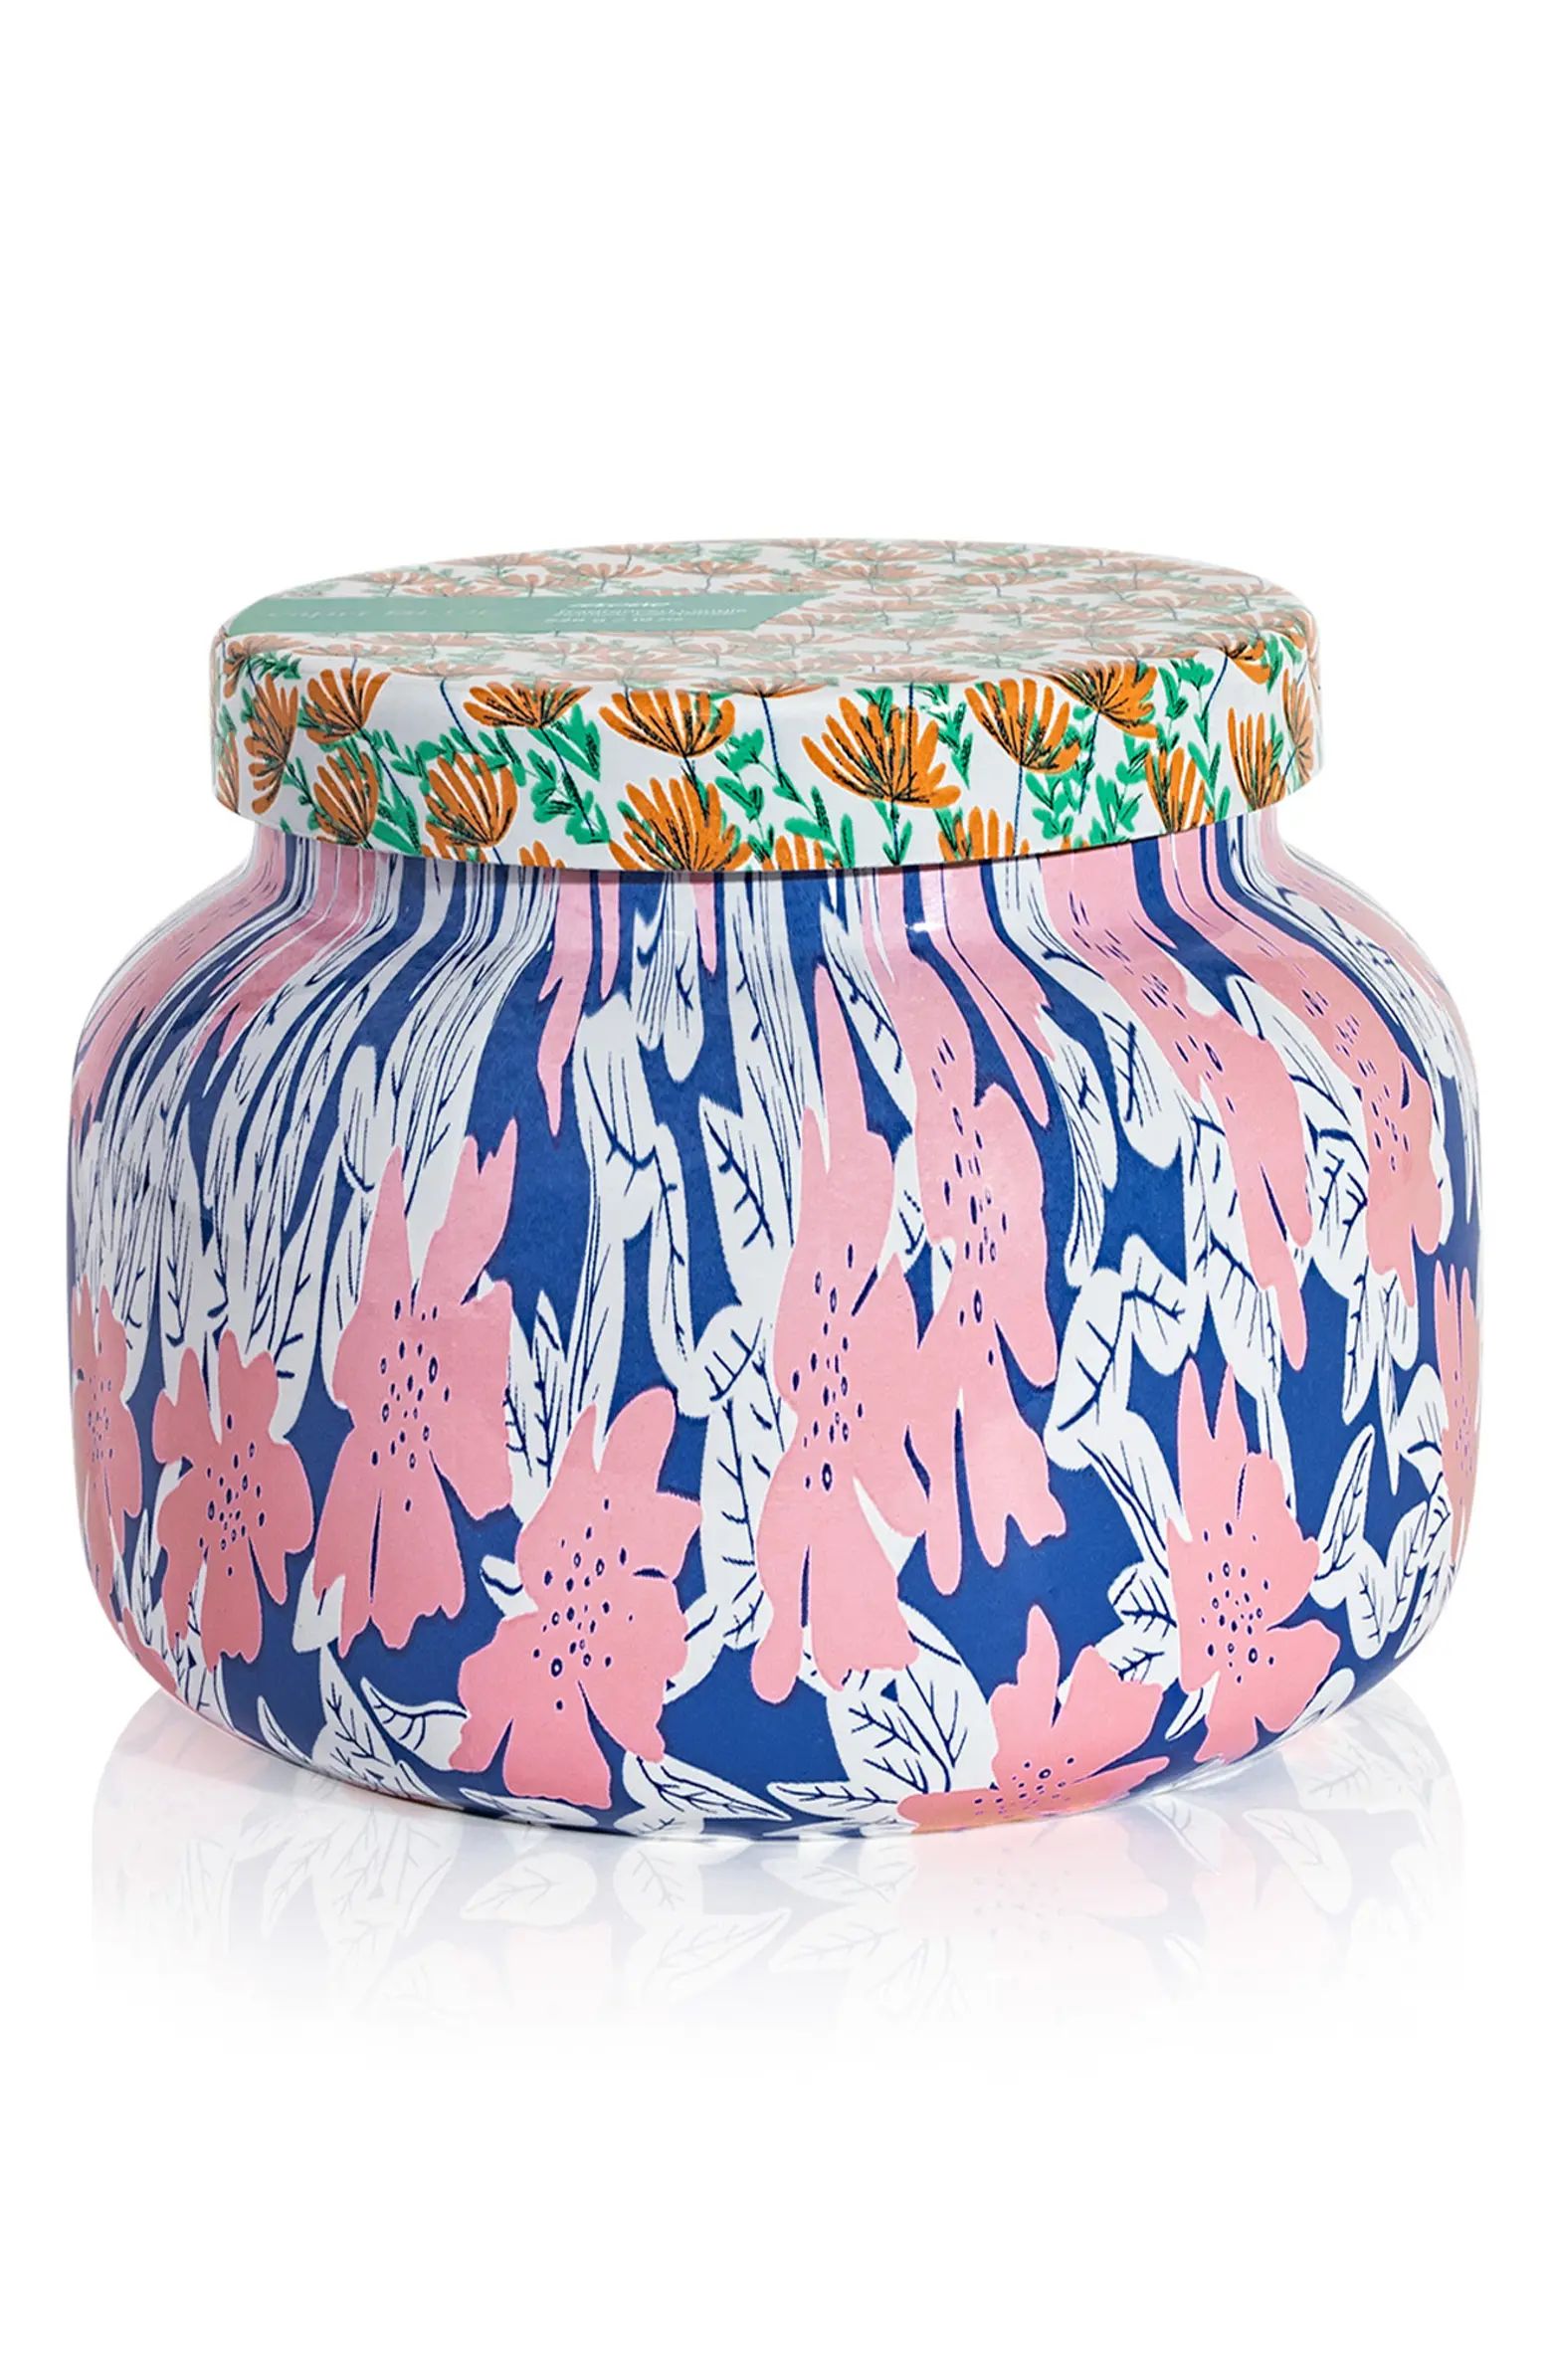 Pattern Play Signature Jar Candle | Nordstrom